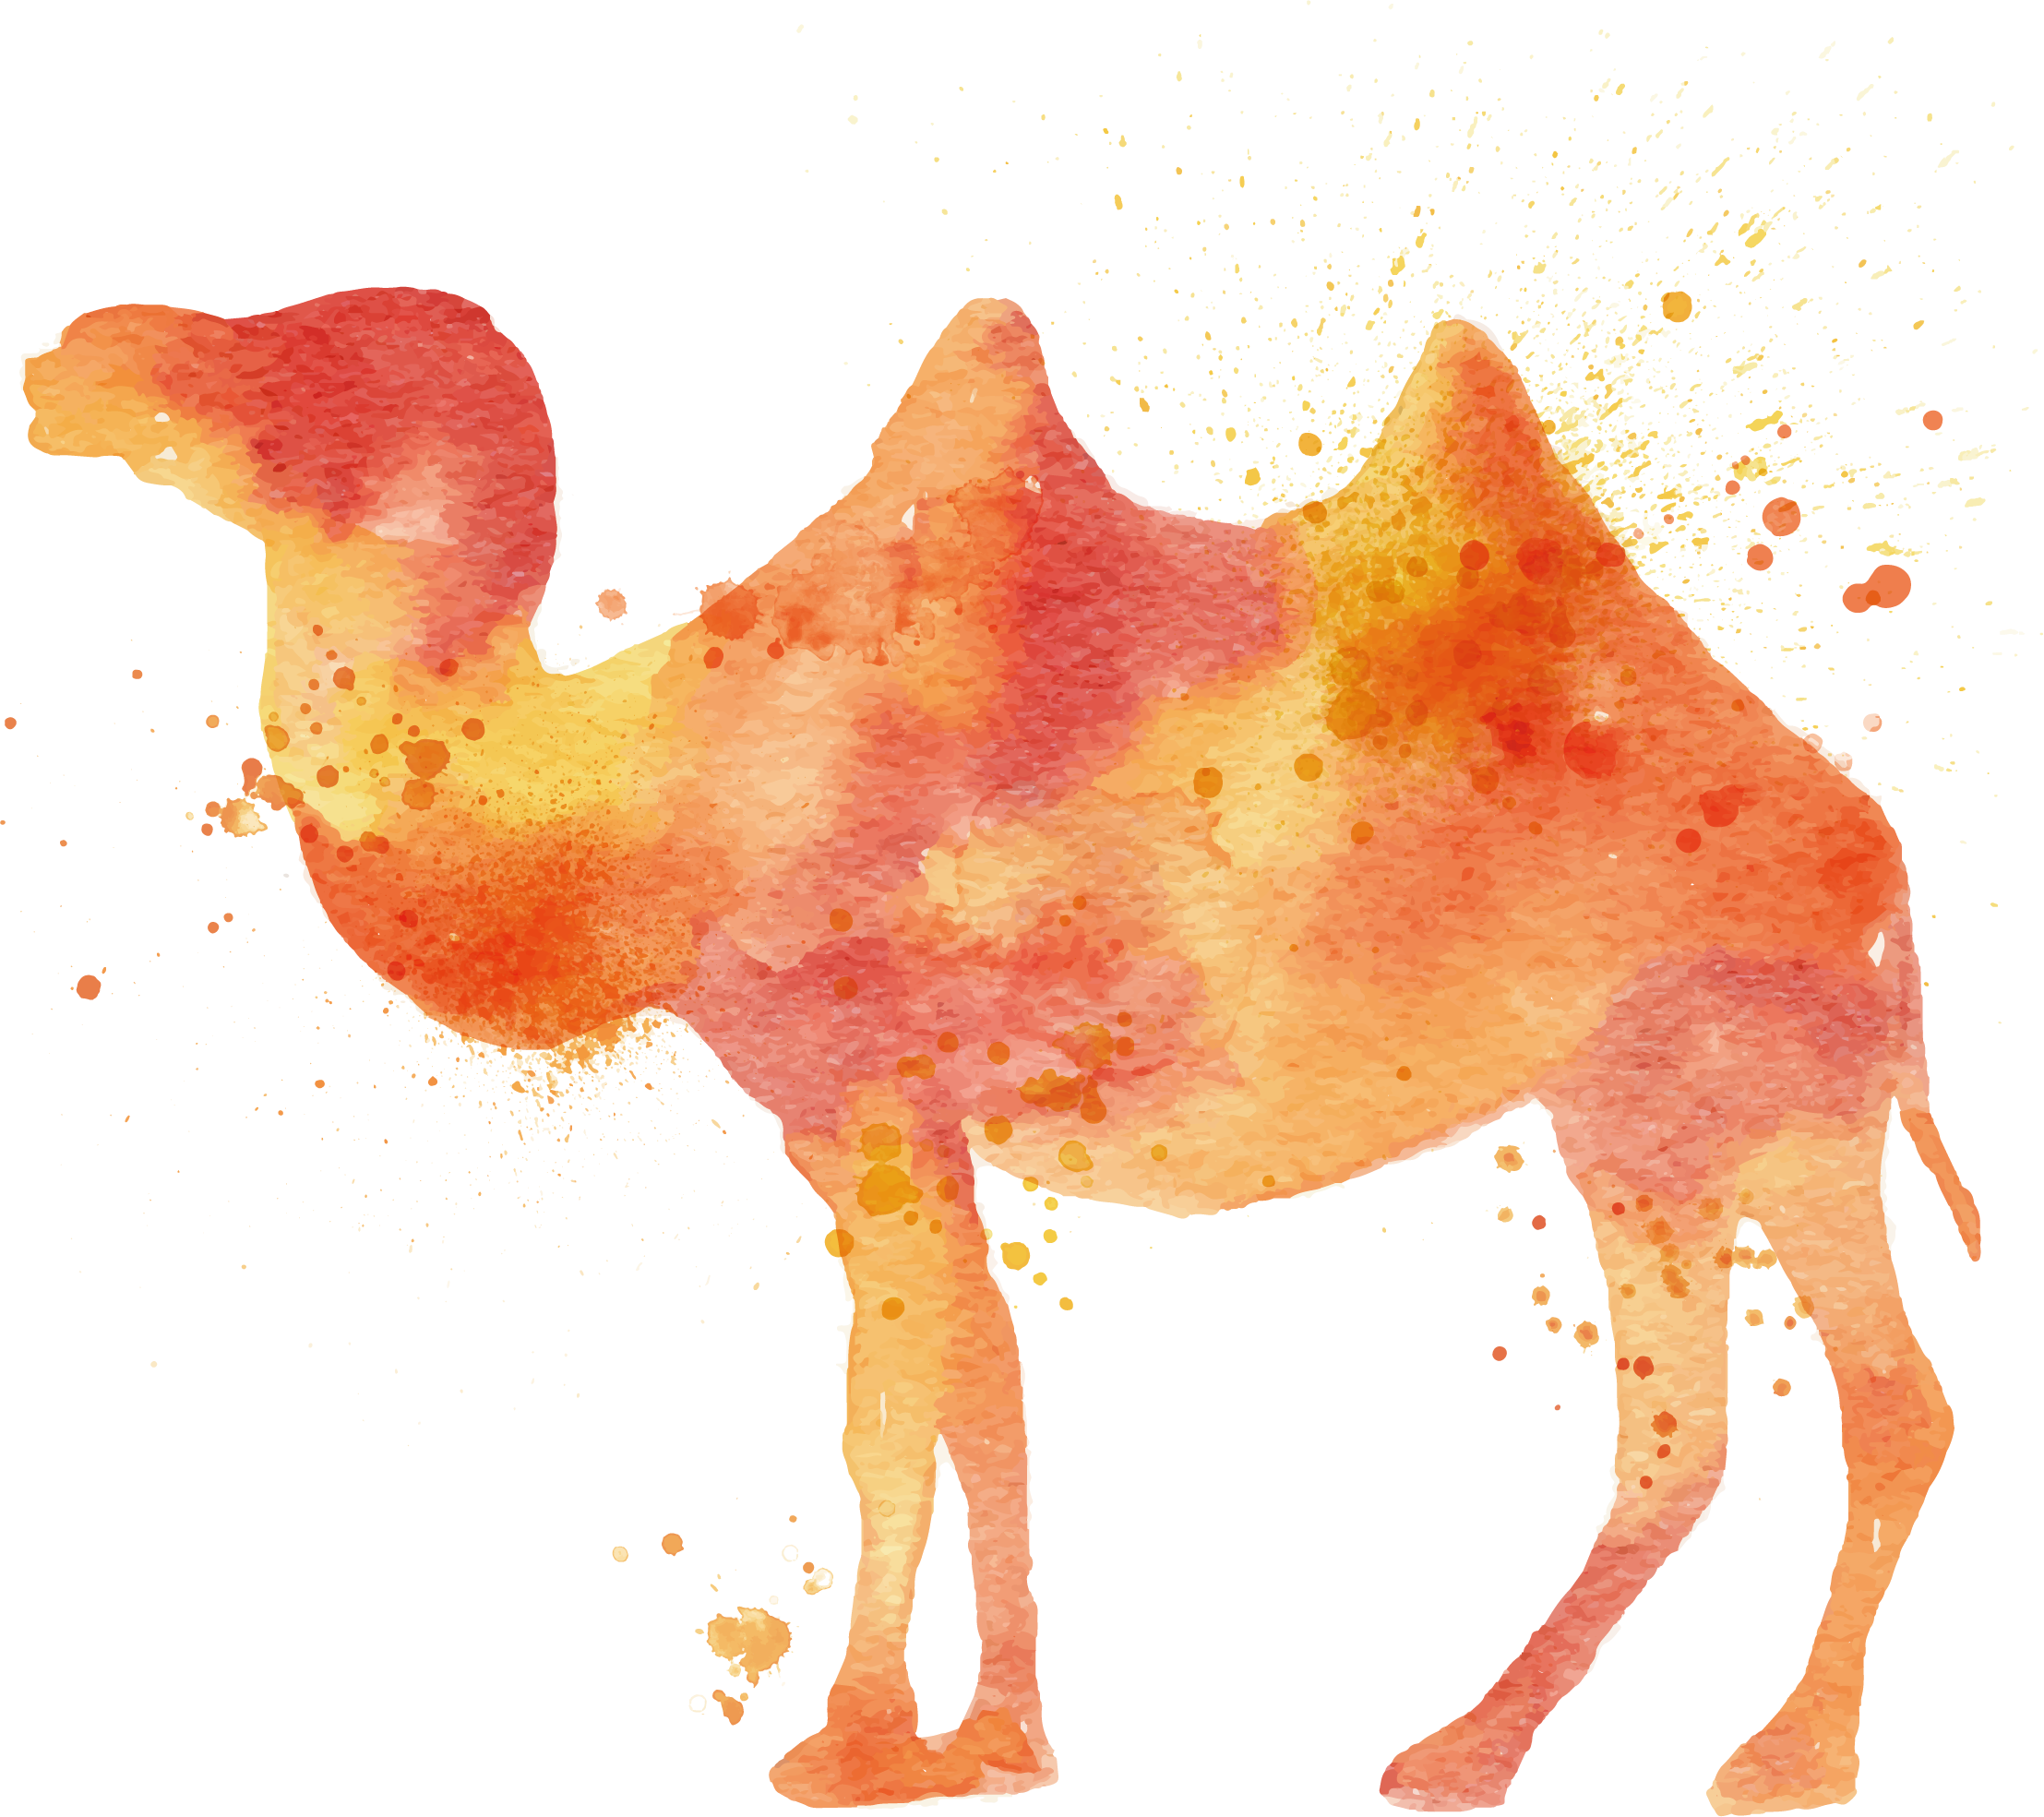 Camel Watercolor Painting Illustration - Watercolor Painting (2215x1969)